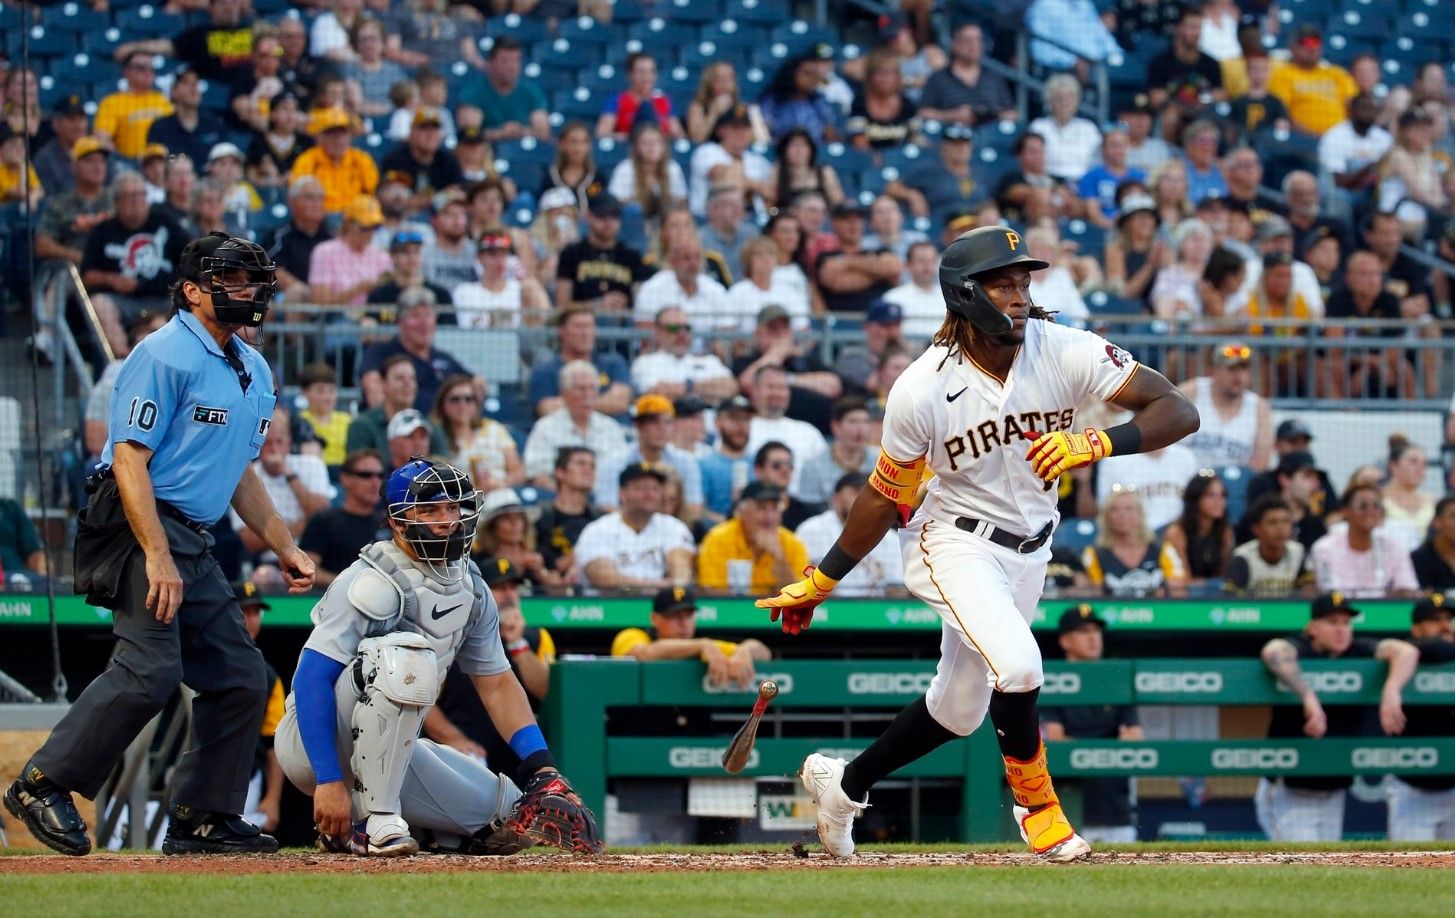 Rookies Madris, Contreras lead Pirates to 7-1 win over Cubs